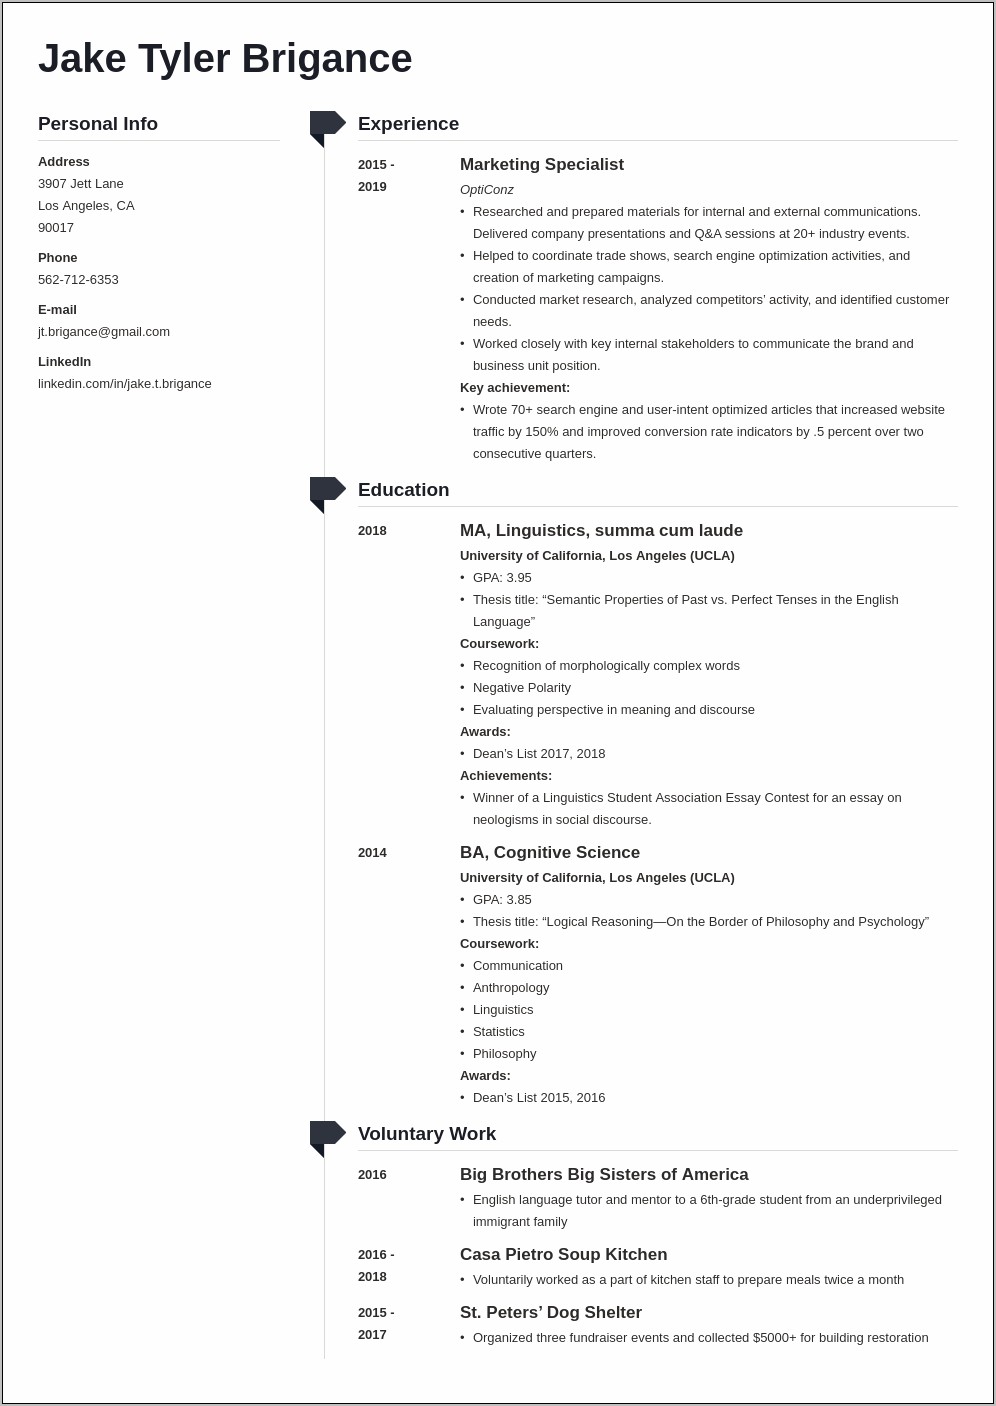 Sample Of Resume Lawwyer In United States